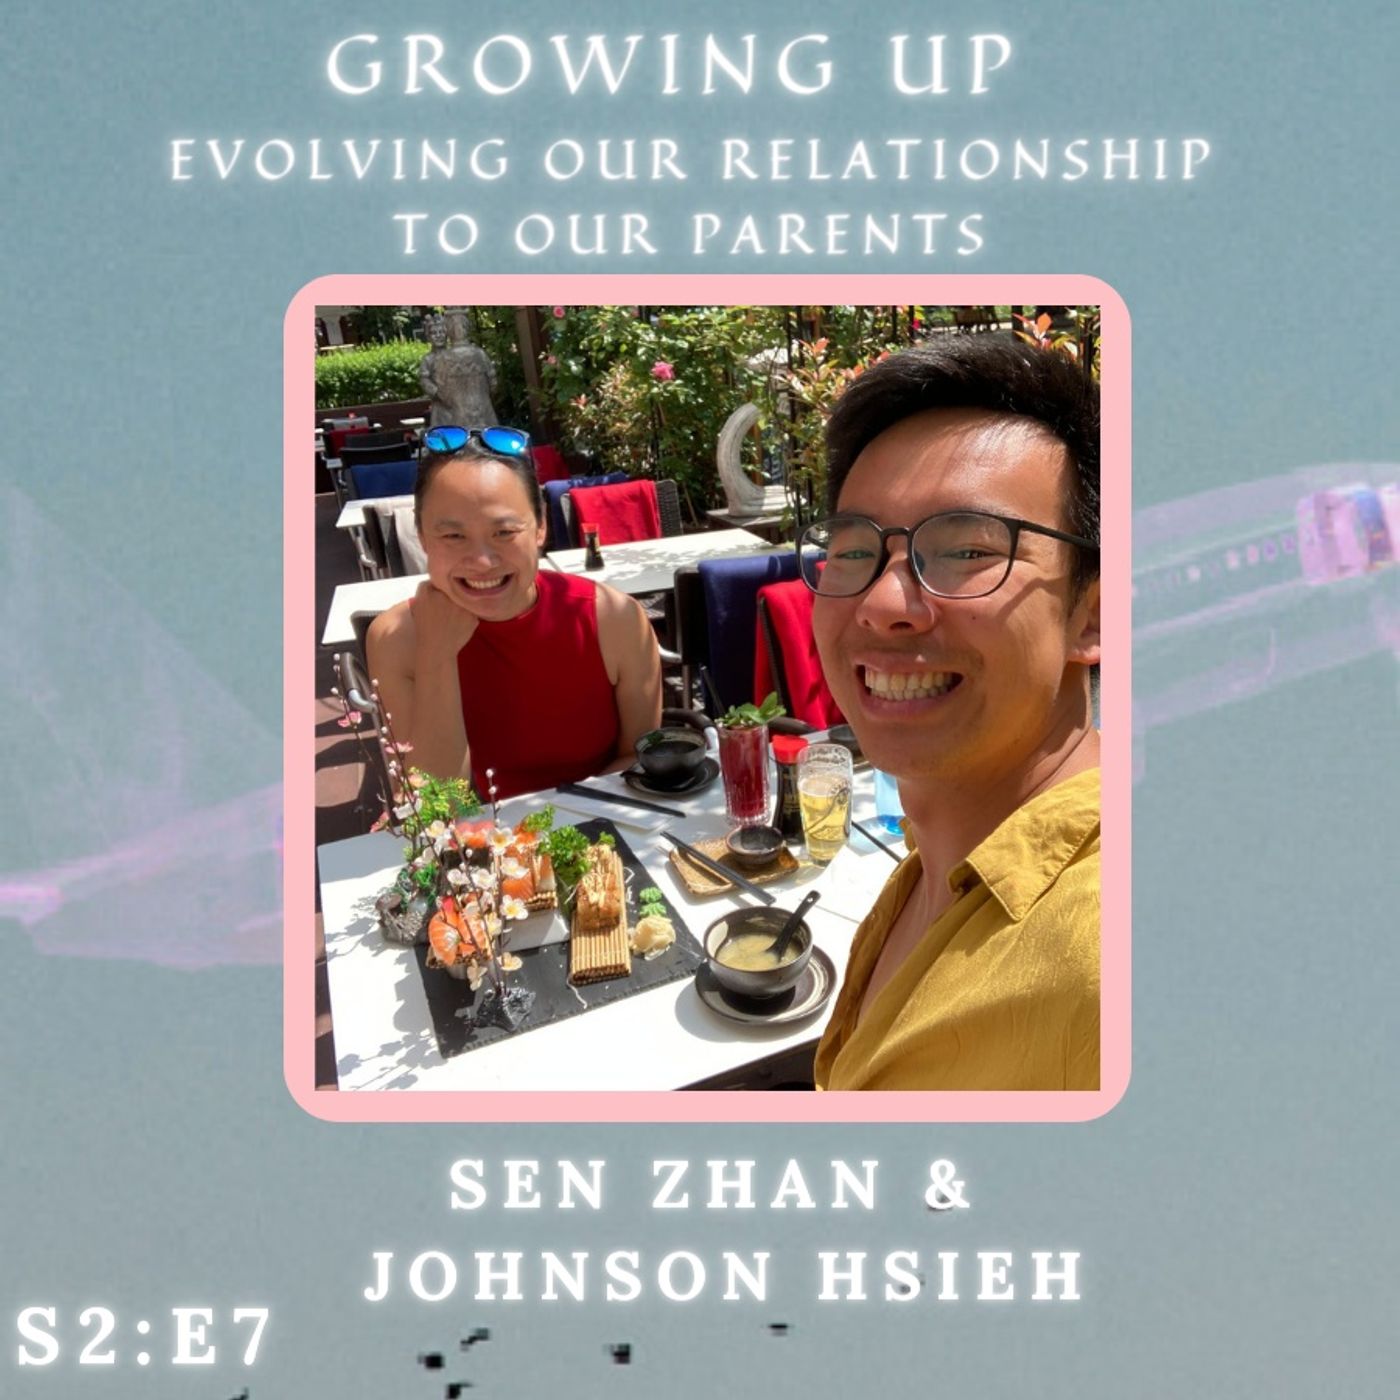 S2 | E7 – Growing Up: Evolving Our Relationship to Our Parents, with Johnson Hsieh (1 of 2)